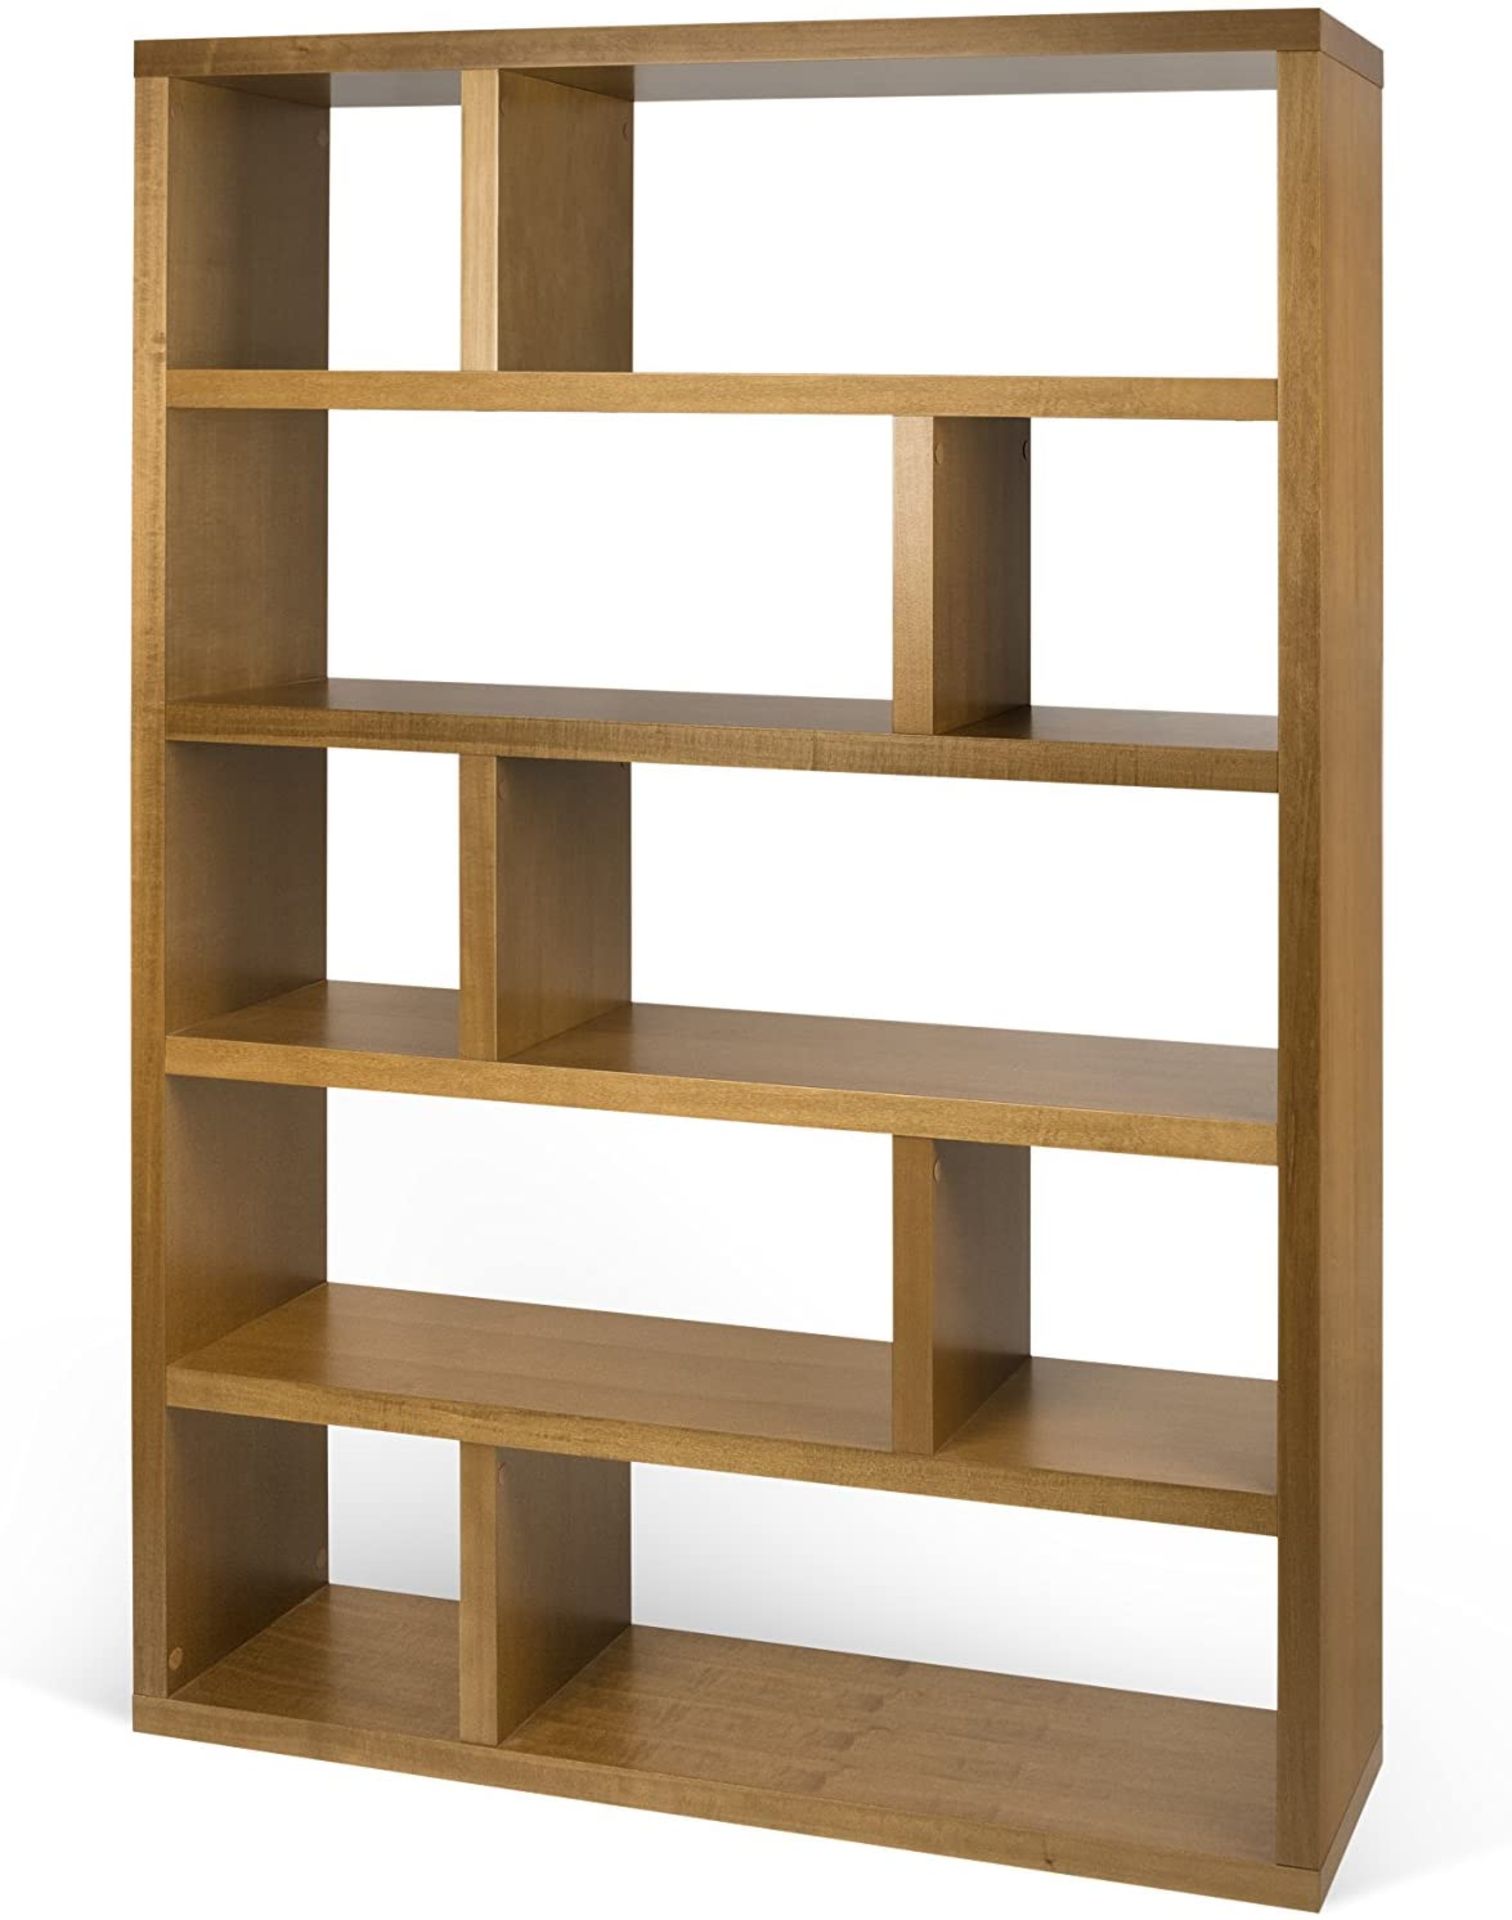 1 x Comtemporary High Shelving Unit - Mukali - Dimensions: 47W x 11D x 68H Inches - New Boxed Stock - Image 3 of 3